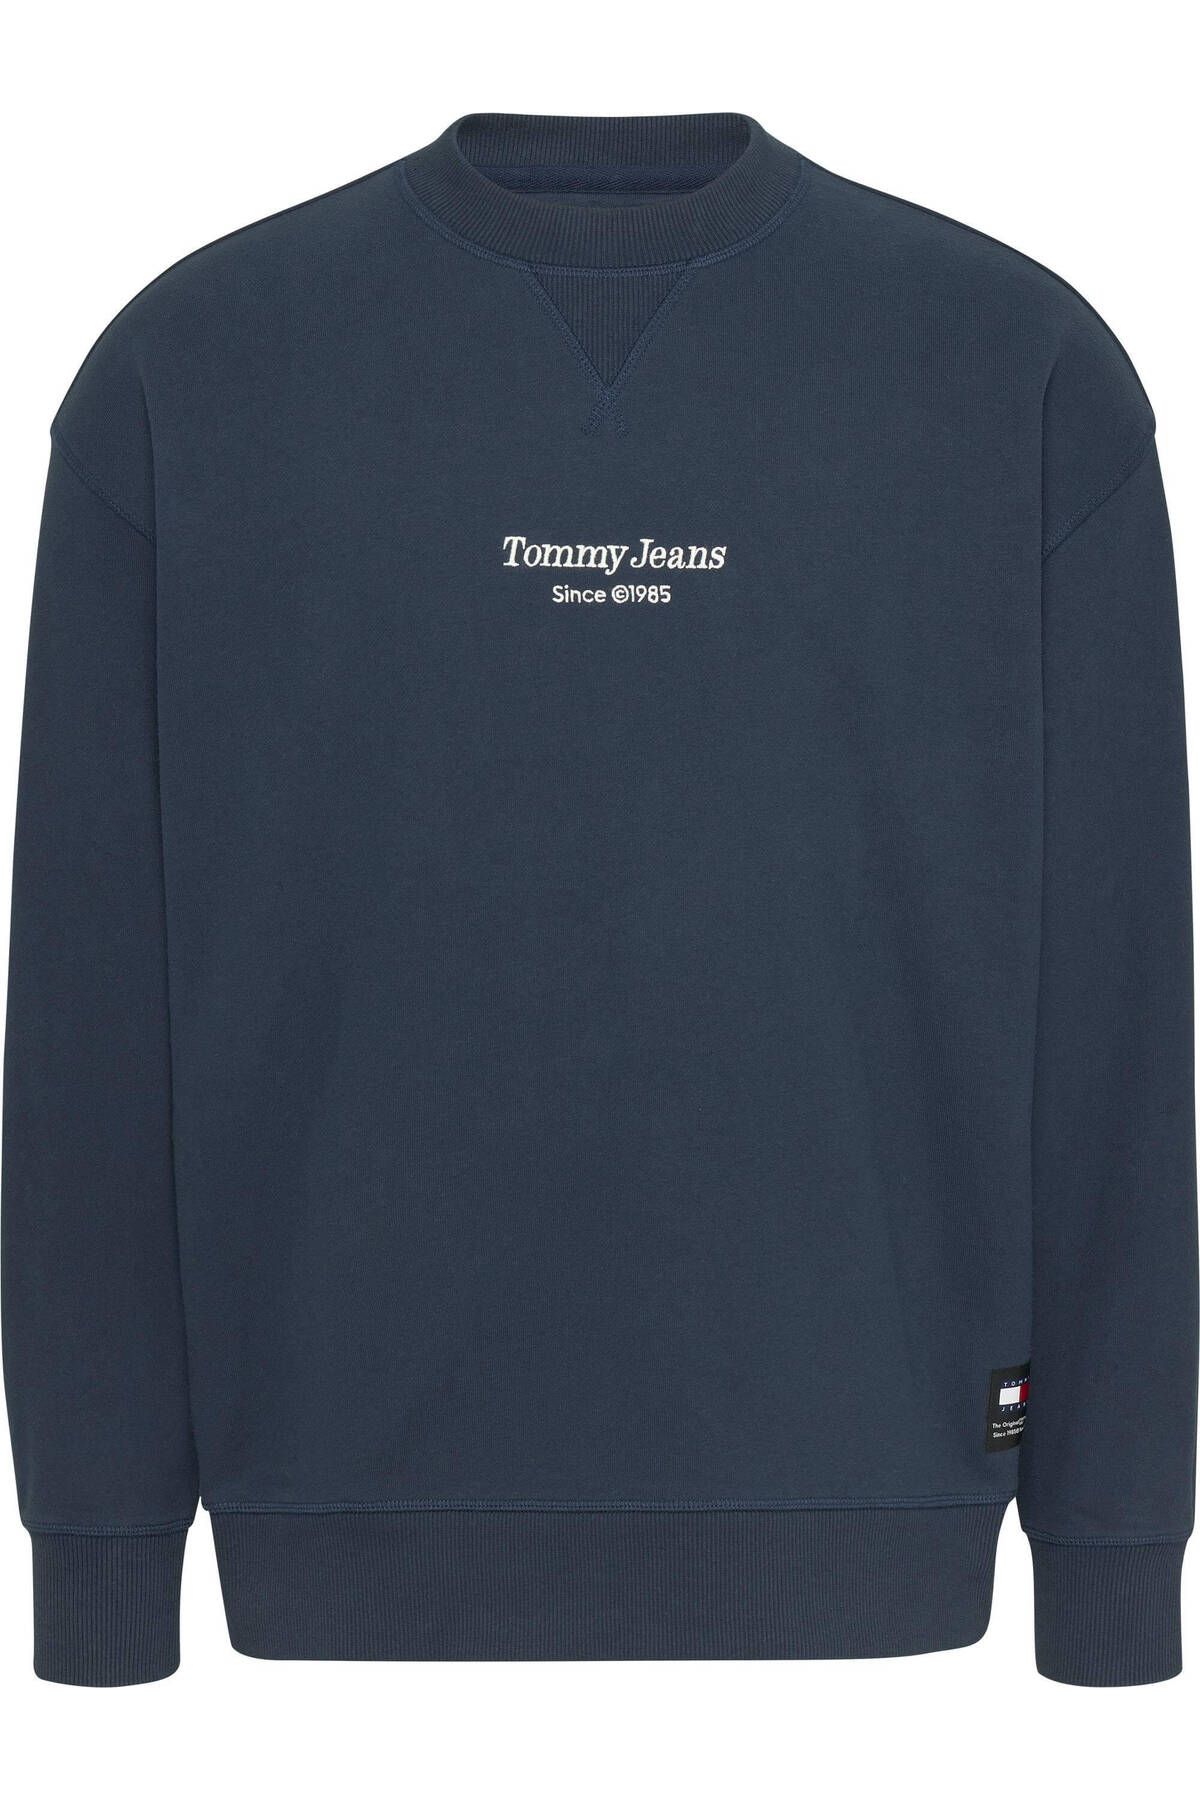 Tommy Hilfiger TOMMY JEANS ERKEK RELAXED FİT ESSENTIAL GRAPHIC 2 YUVARLAK YAKA